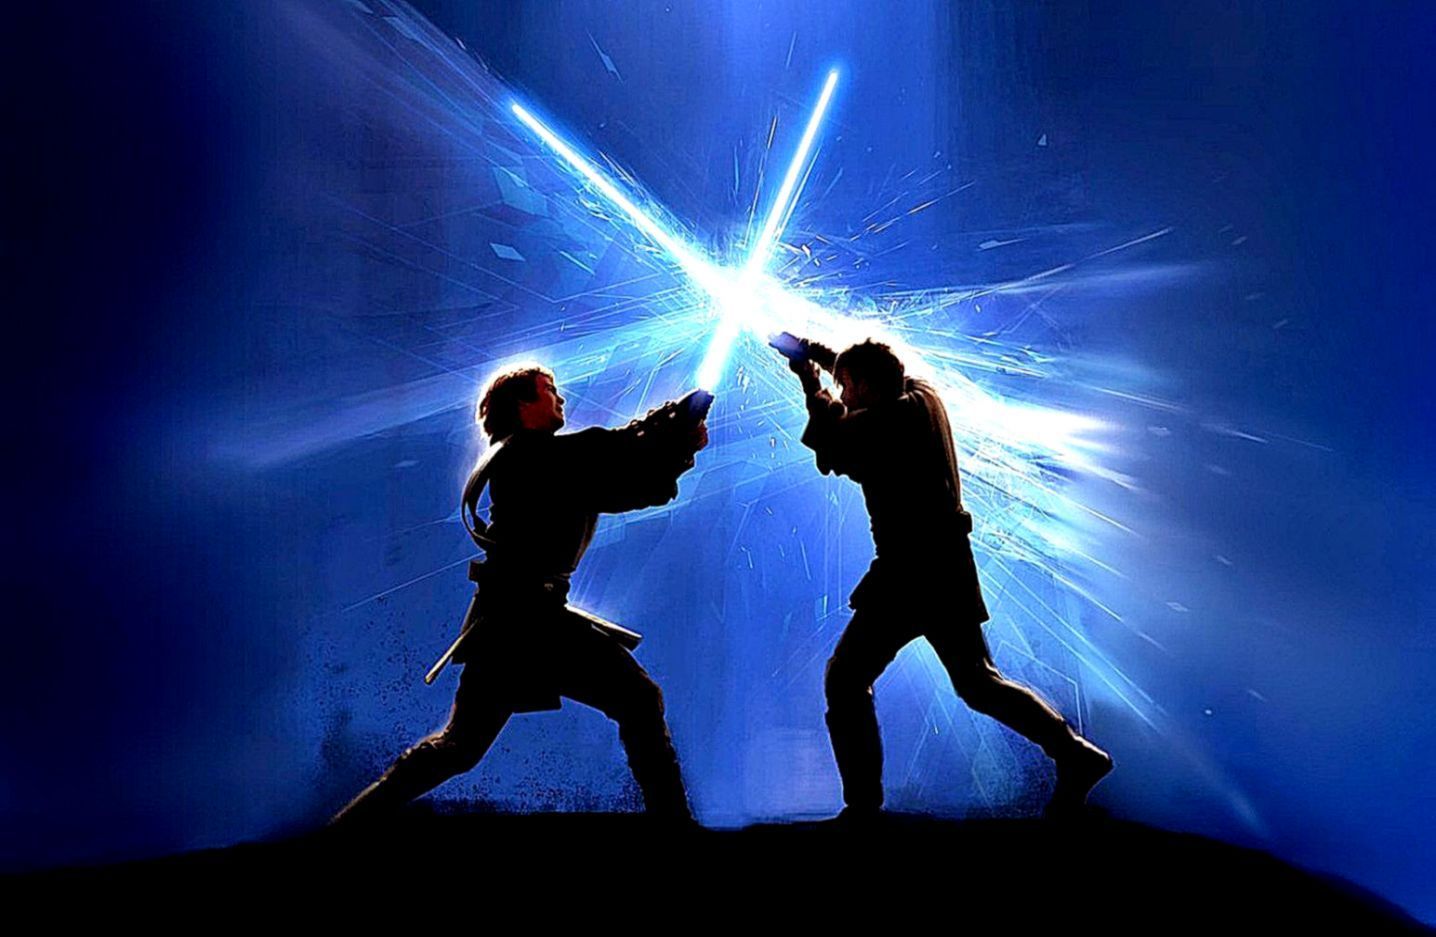 You can also upload and share your favorite lightsaber duel desktop wallpap...